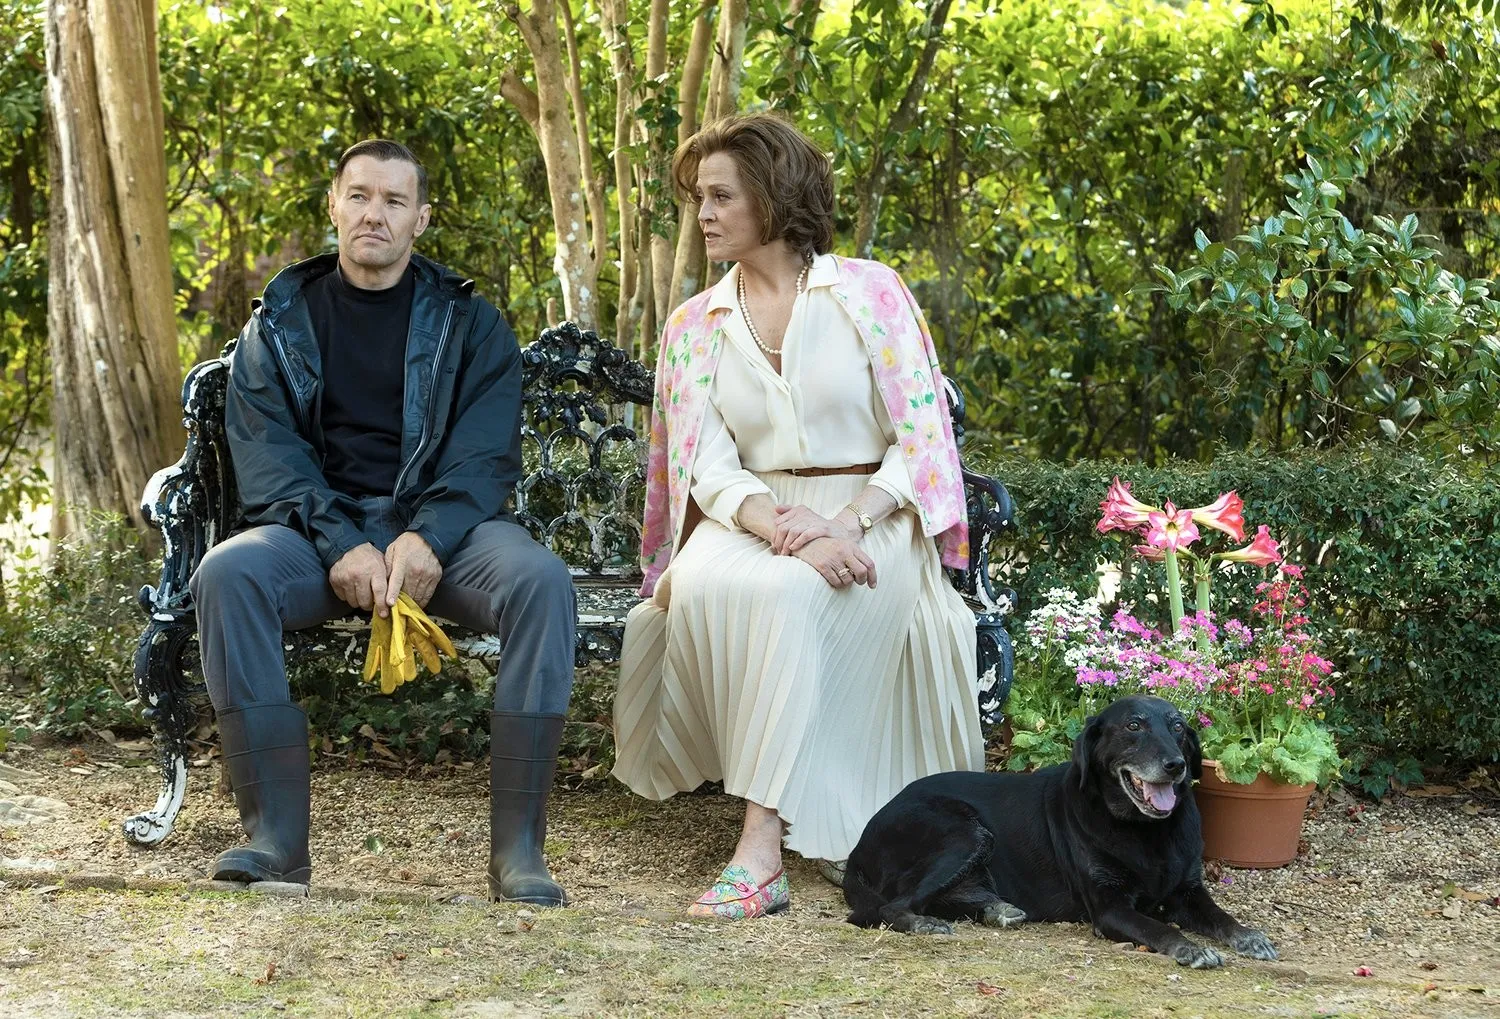 Two people sit together in a private garden. Next to them is a black dog.